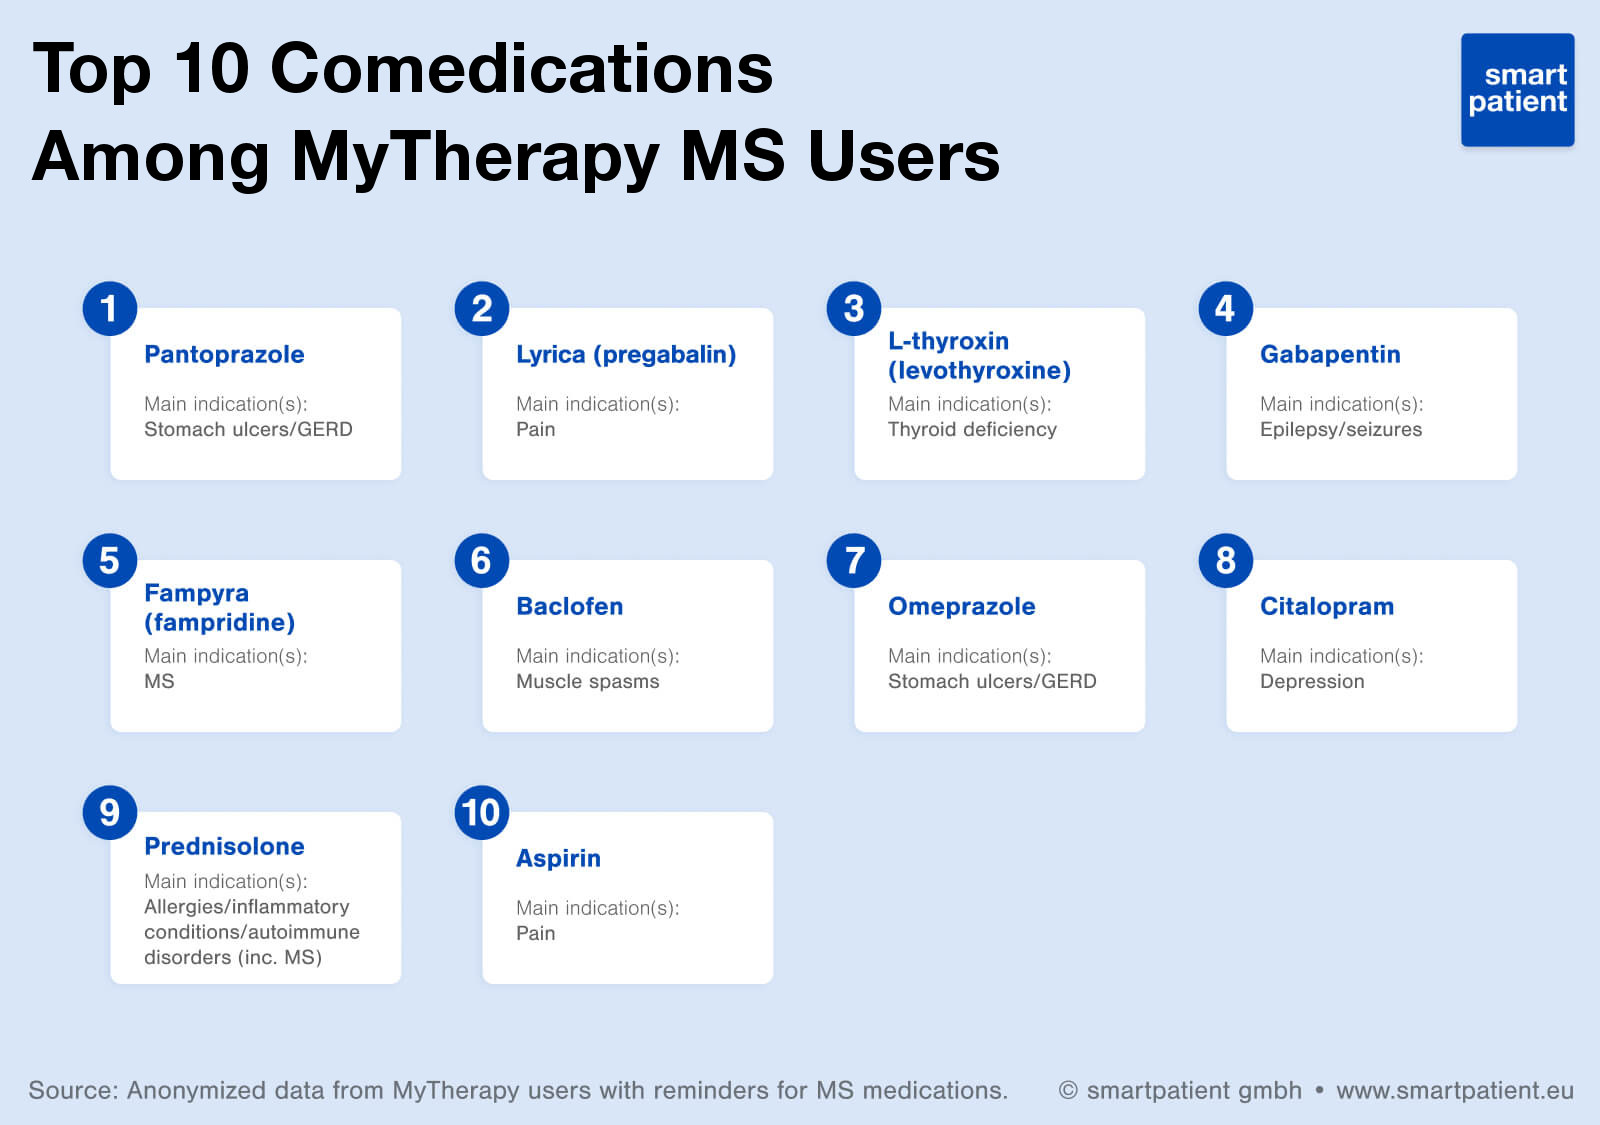 List of the top 10 MS comedications among MyTherapy users